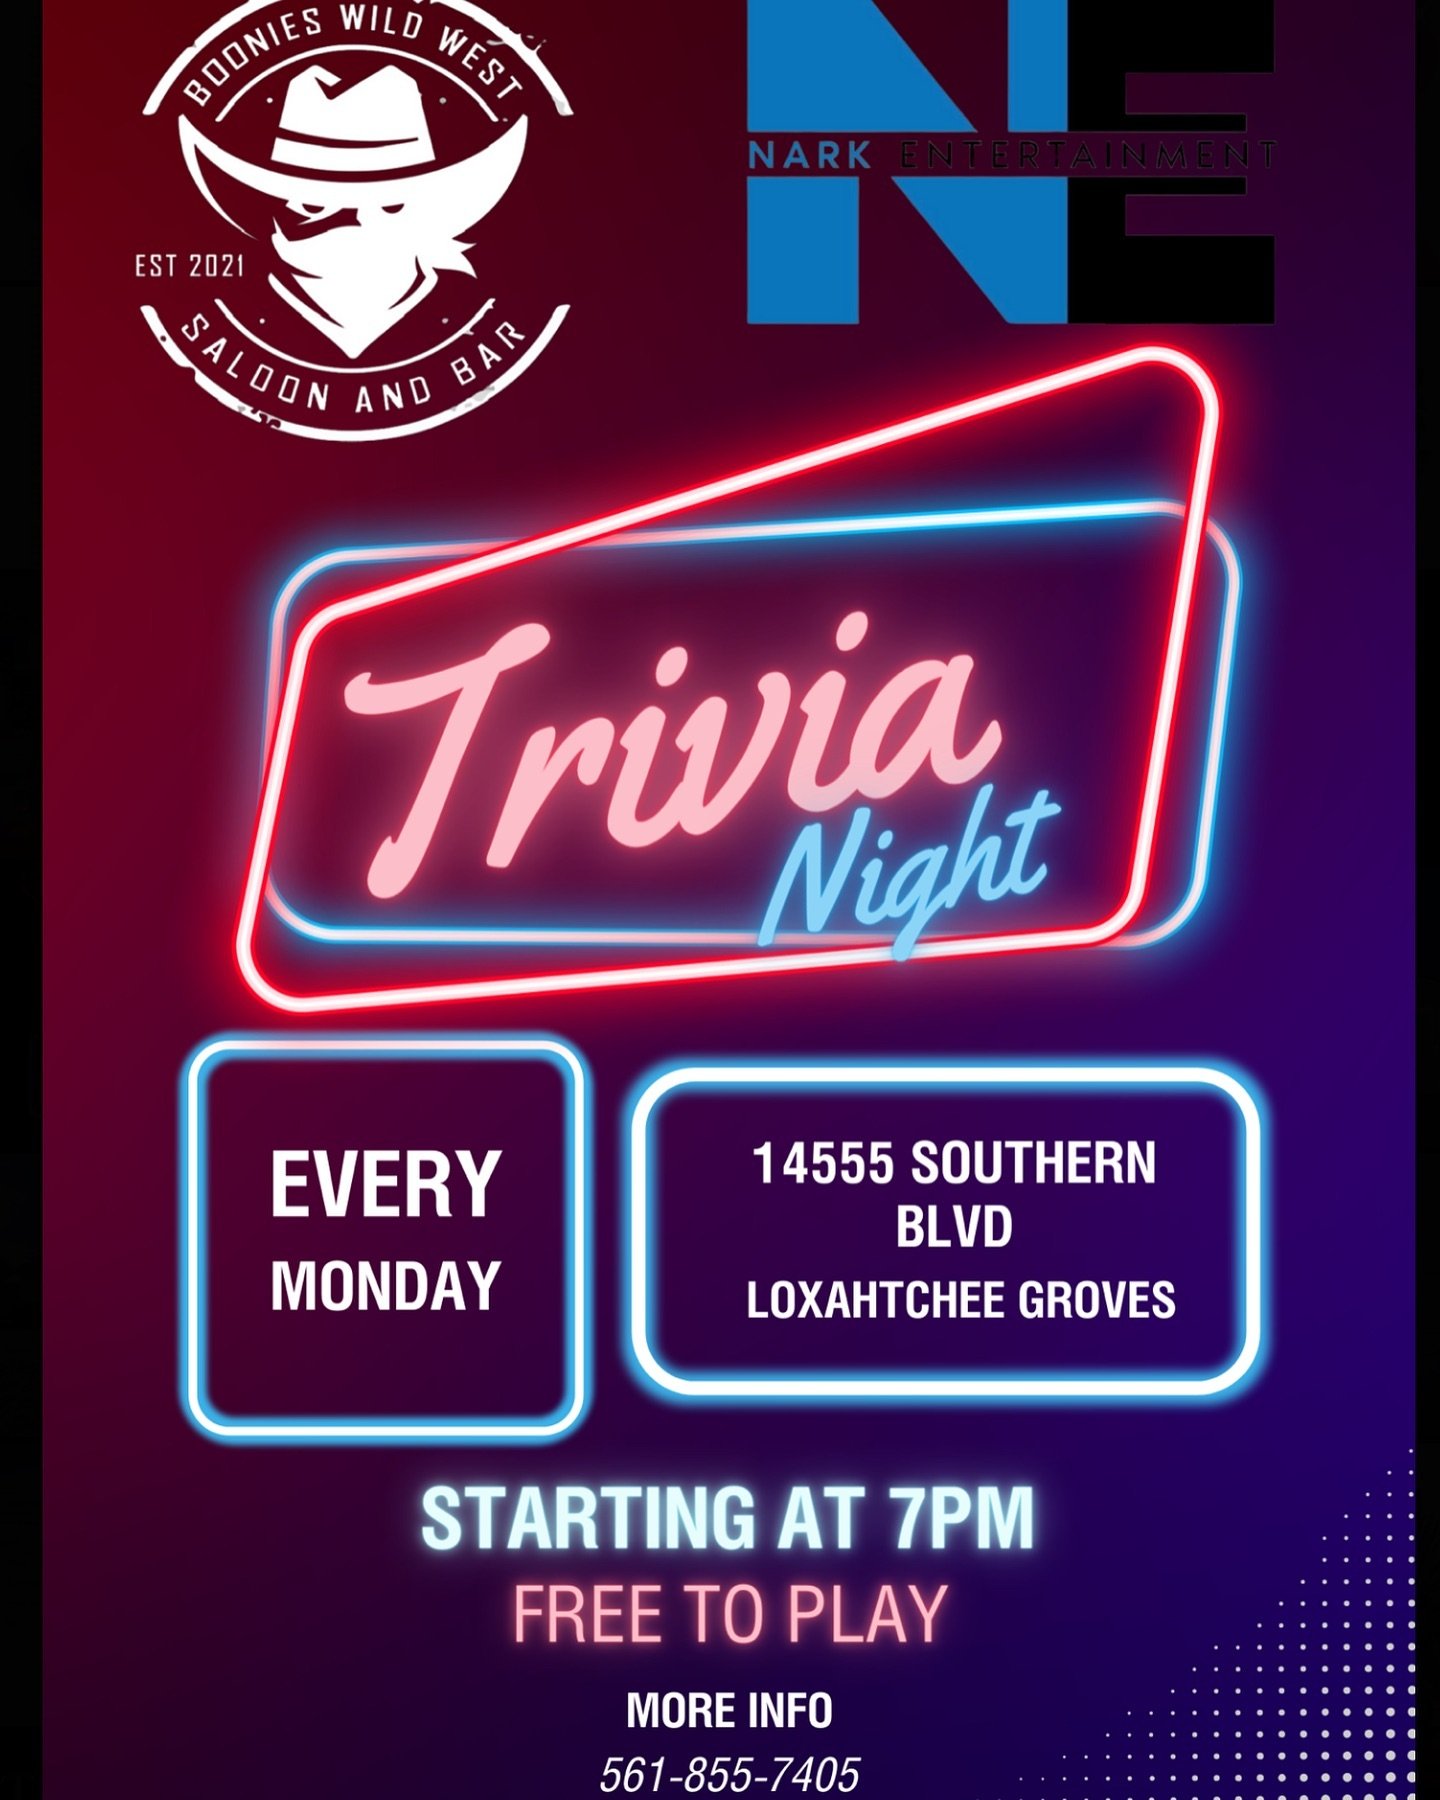 Change of Plans! 
Come join us every Monday for trivia! ✏️

#Boonies #trivia #fun #loxahatchee #wellington #booniesww #saloon #bar #food #drinks #beer #triviagame